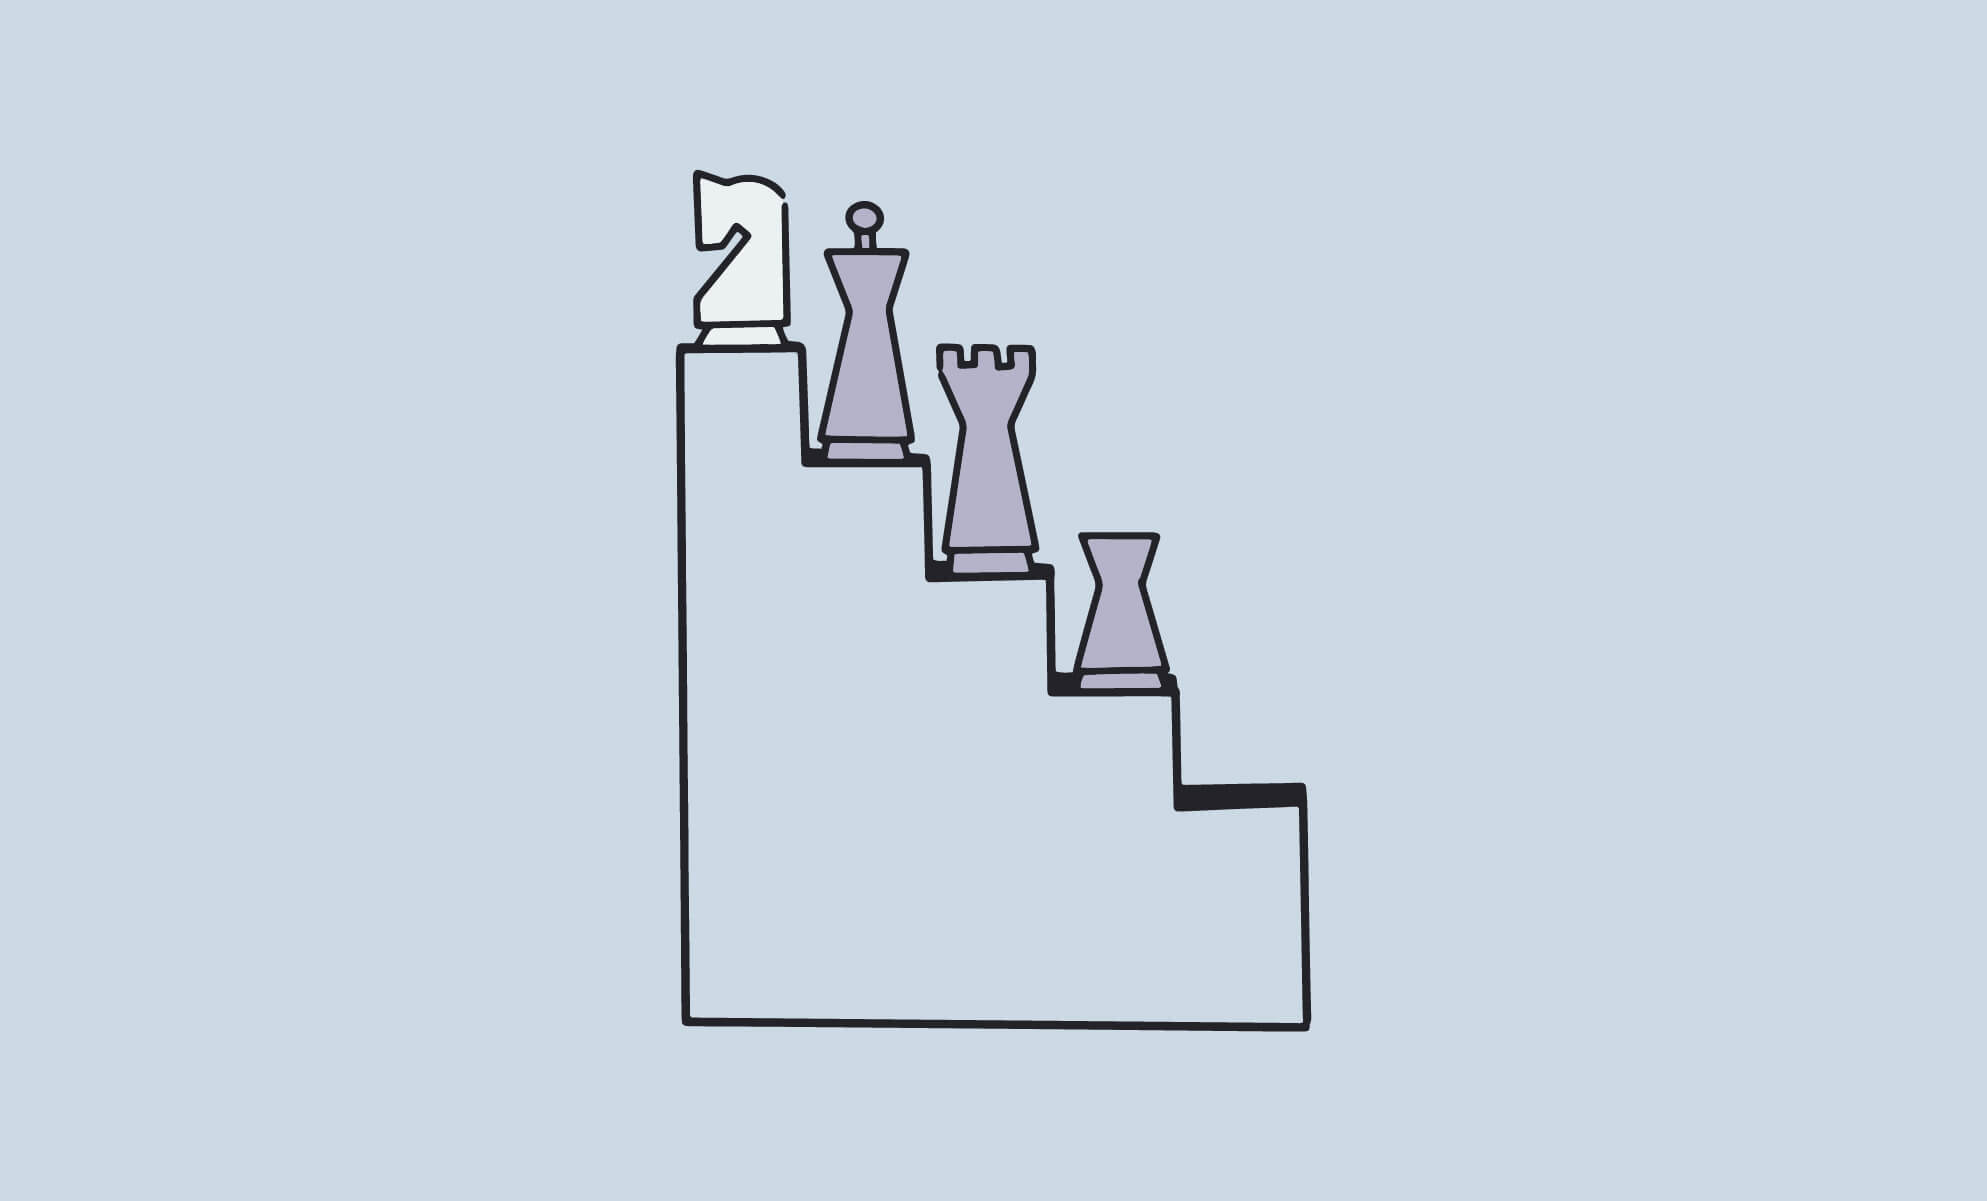 Chess pieces stacked on a stair case